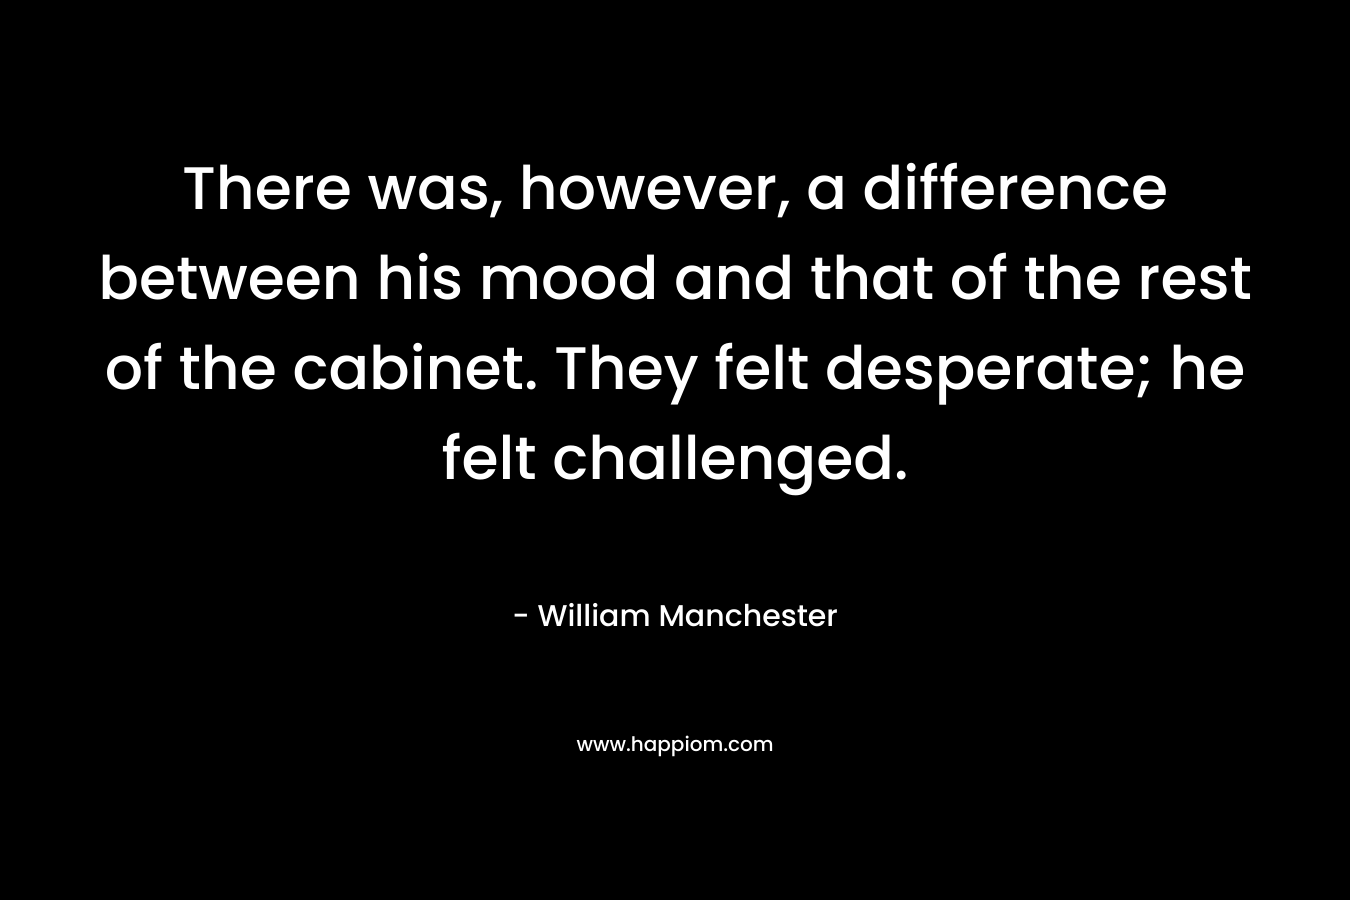 There was, however, a difference between his mood and that of the rest of the cabinet. They felt desperate; he felt challenged. – William Manchester